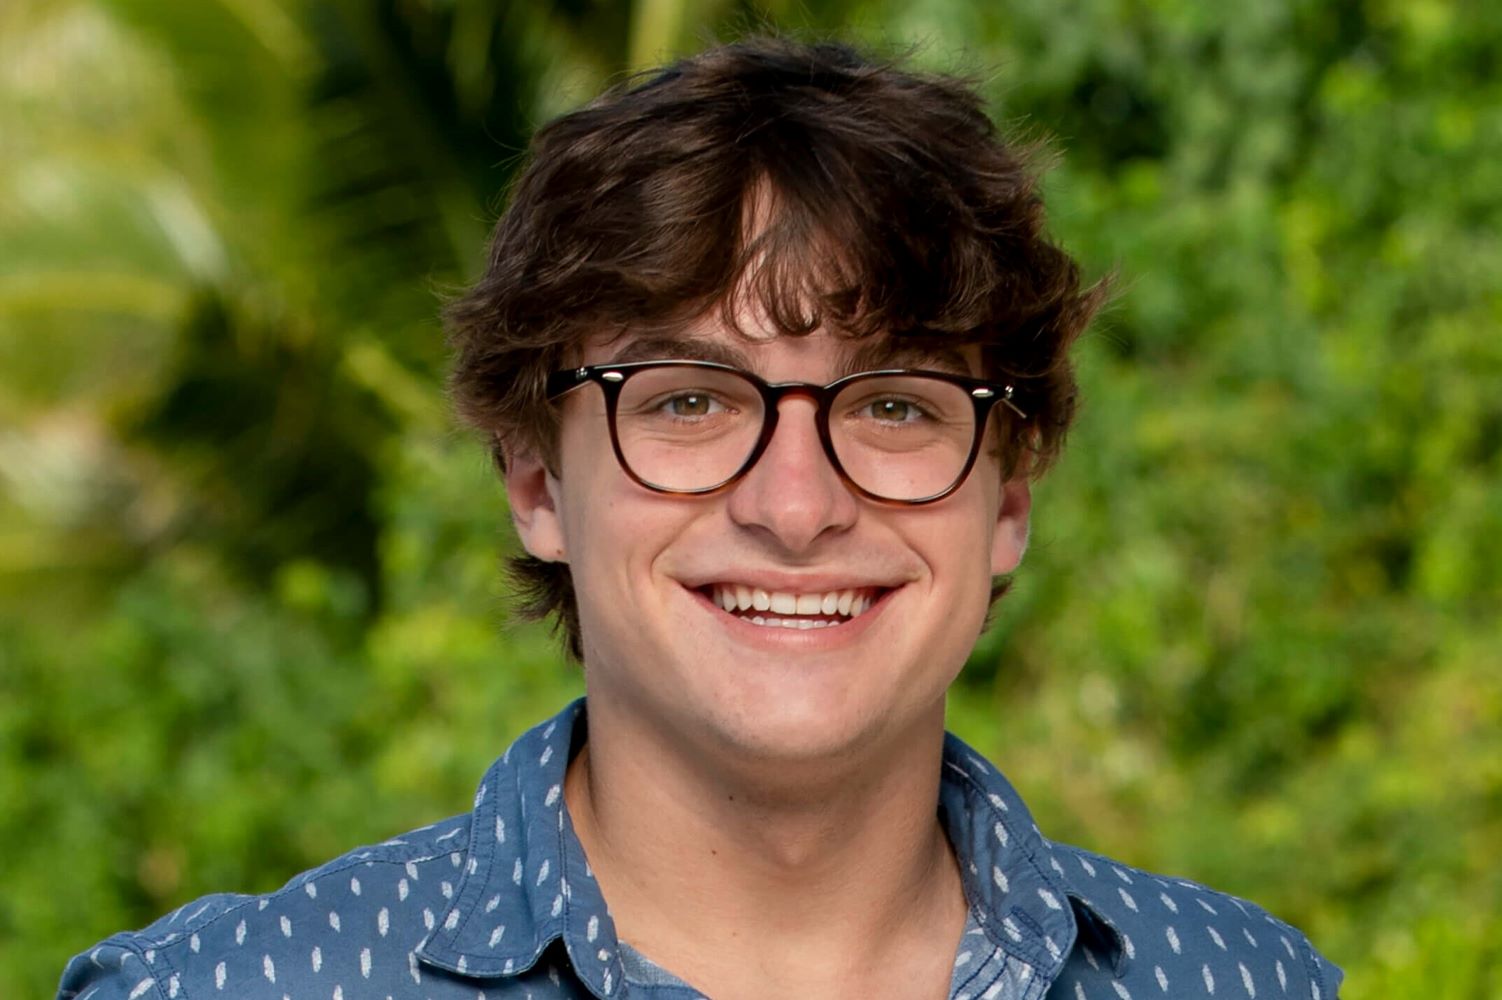 Carson Garrett, who is a part of the 'Survivor 44' cast, wears a blue polo shirt with white dots on it and dark brown-framed glasses.